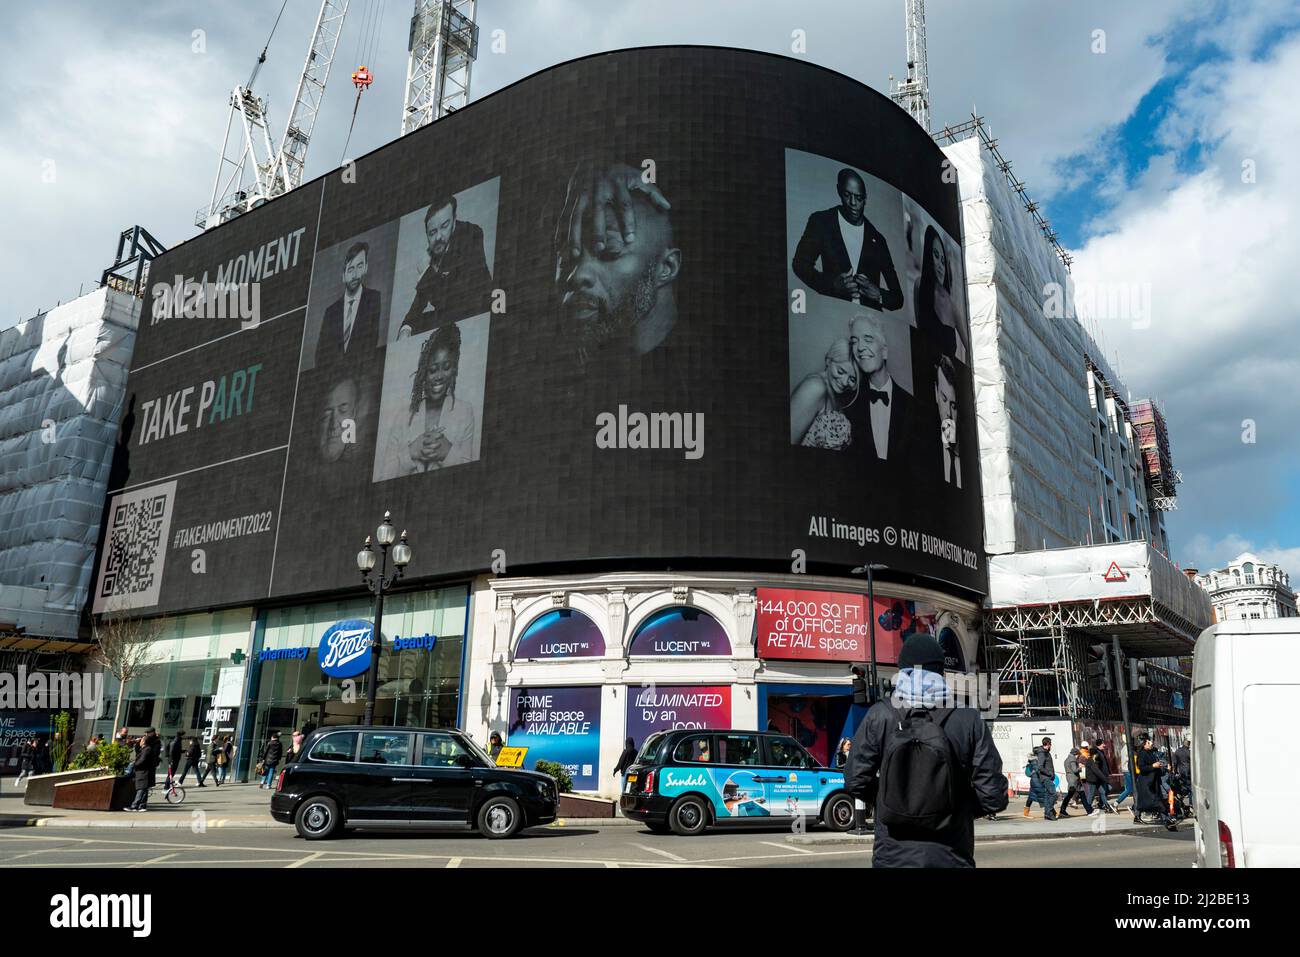 London, UK. 31 March 2022. Images taken by photographer Ray Burmiston from  the exhibition 'Art of London Presents Take A Moment 2022' are seen on the Piccadilly  Circus screens. Launched by NHS